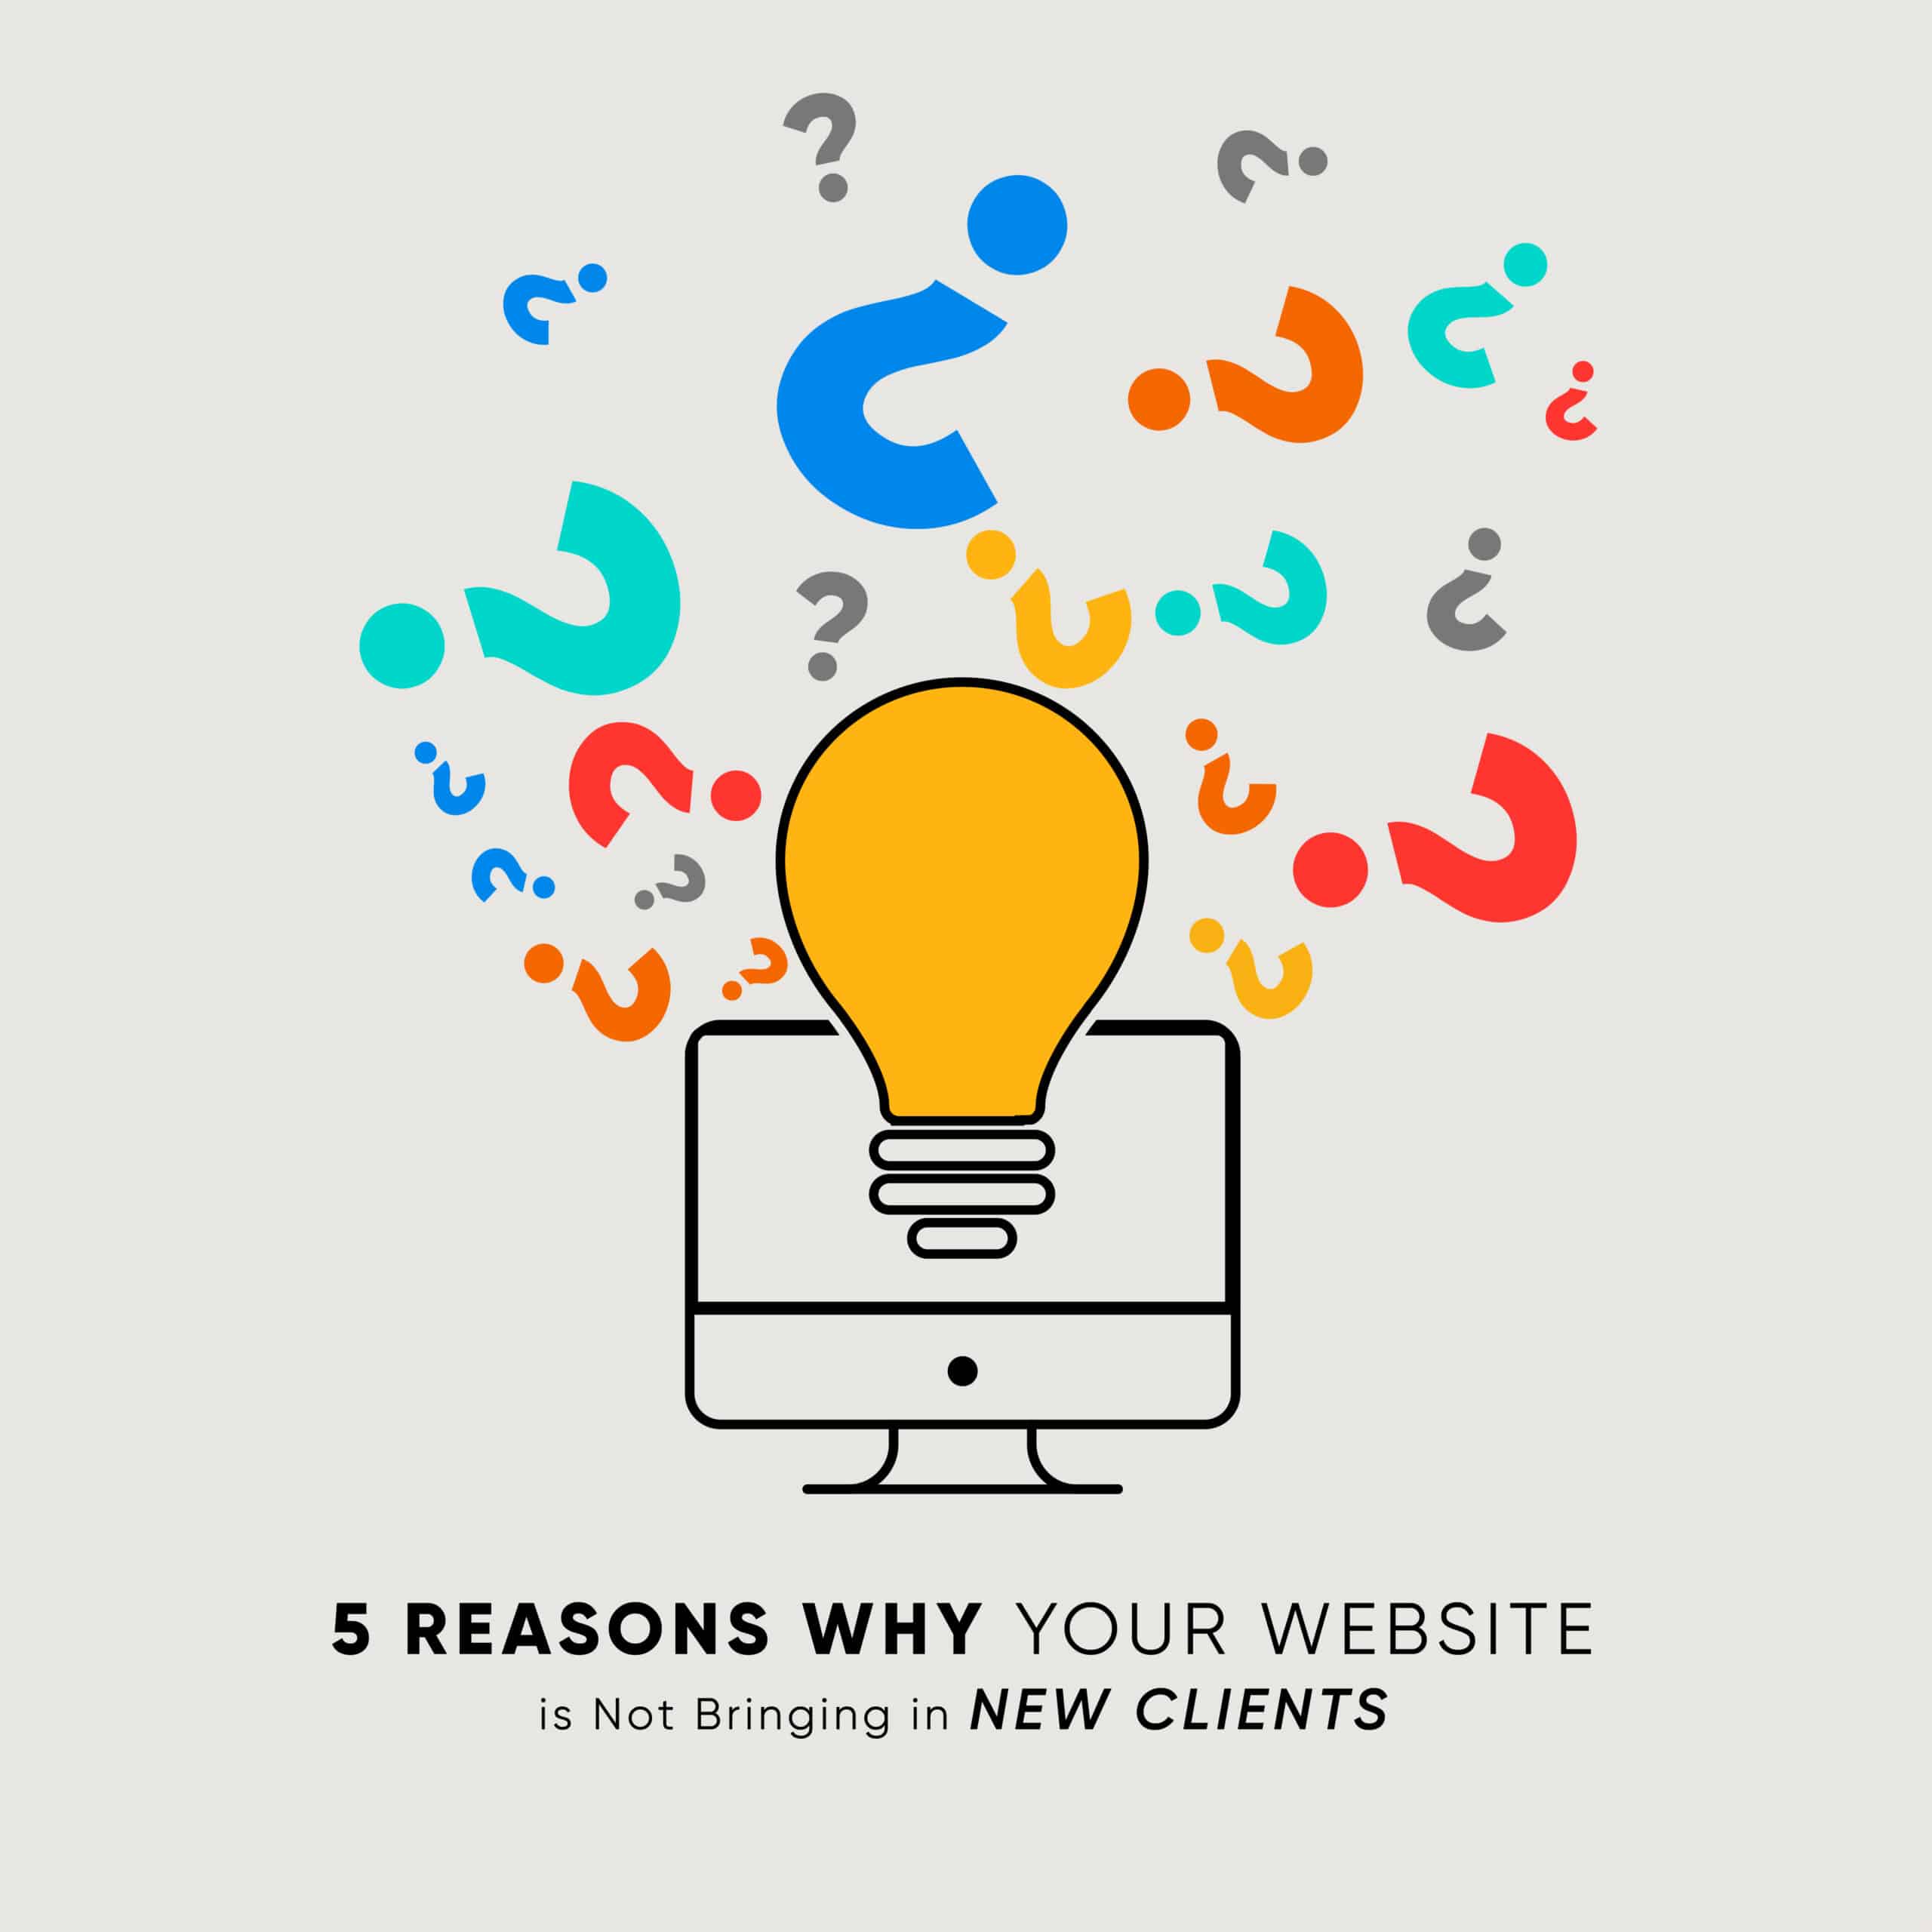 5 Reasons Why Your Website is Not Bringing in New Clients